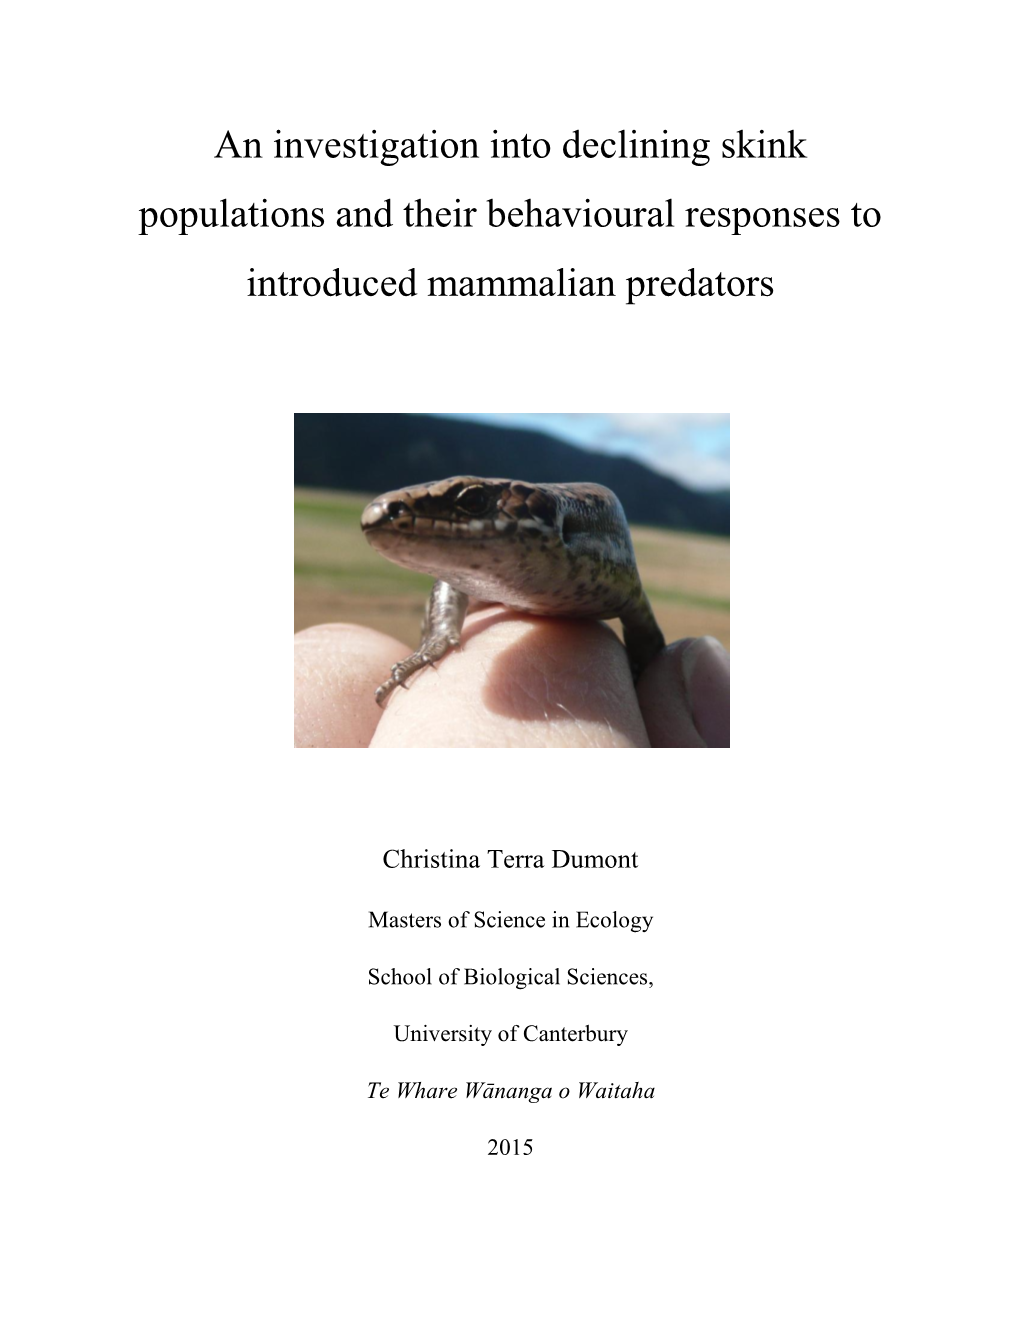 An Investigation Into Declining Skink Populations and Their Behavioural Responses to Introduced Mammalian Predators